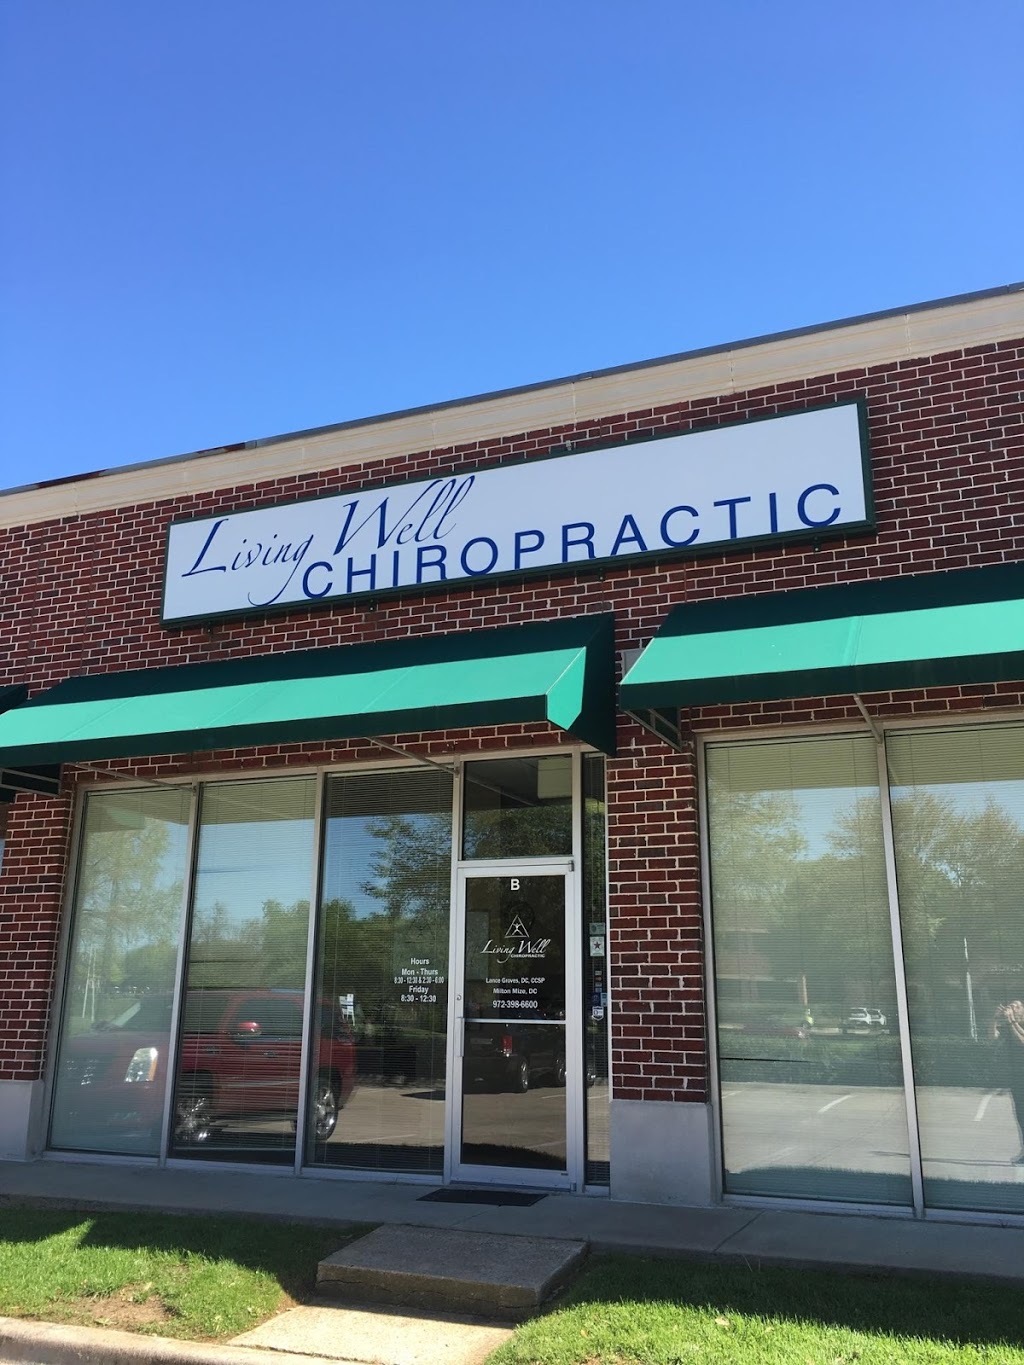 Living Well Chiropractic of Plano | 2120 W Spring Creek Pkwy ste b, Plano, TX 75023 | Phone: (972) 398-6600